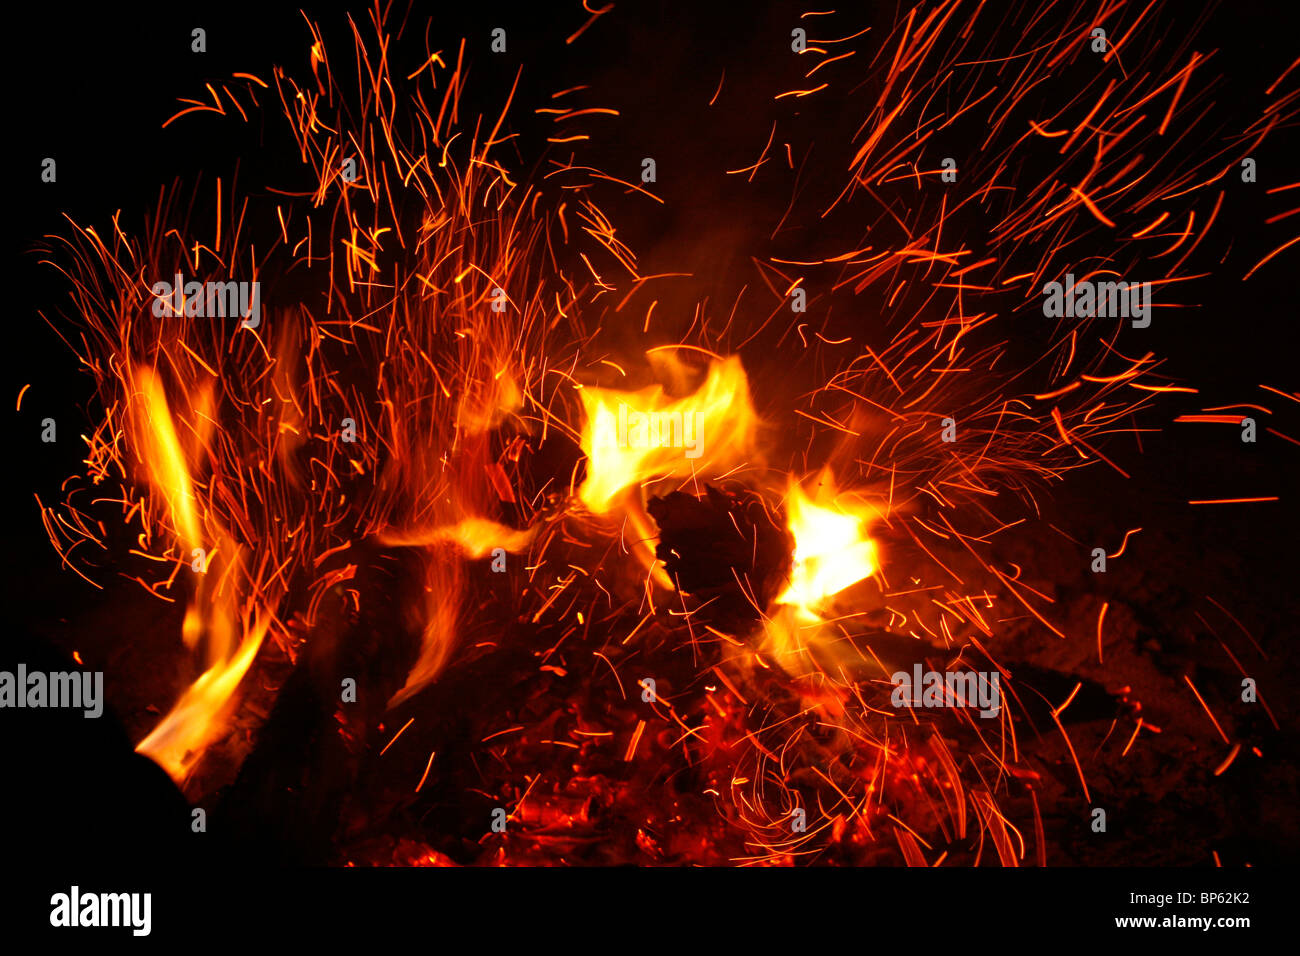 Fire,slow shutter,pattern,texture,log,wood,flames,red,hot,india,BR hills,creative,photography,nature,wildlife,artistic,abstract Stock Photo